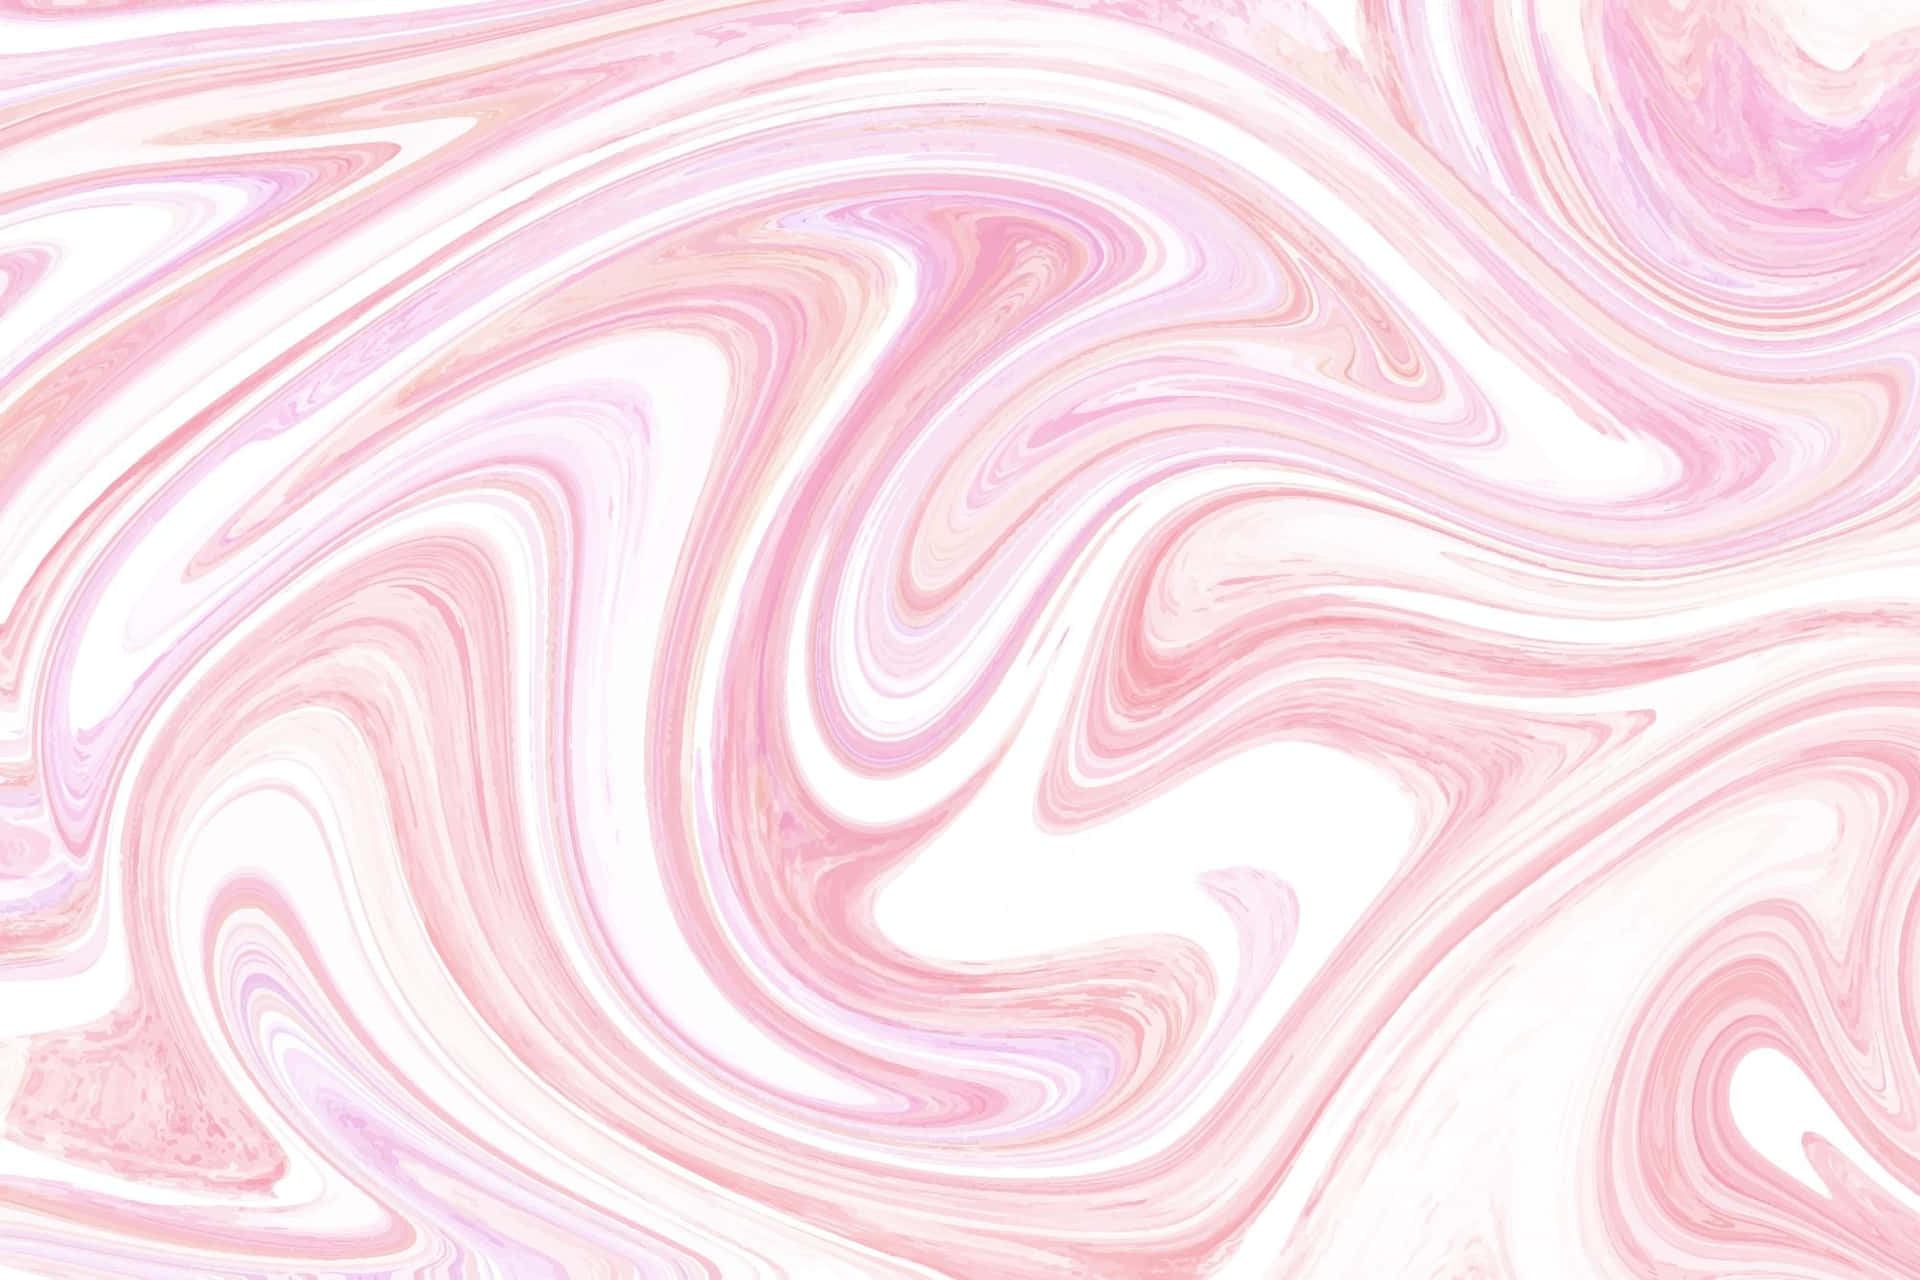 "Abstract Art: A Vibrant Pink Swirl"